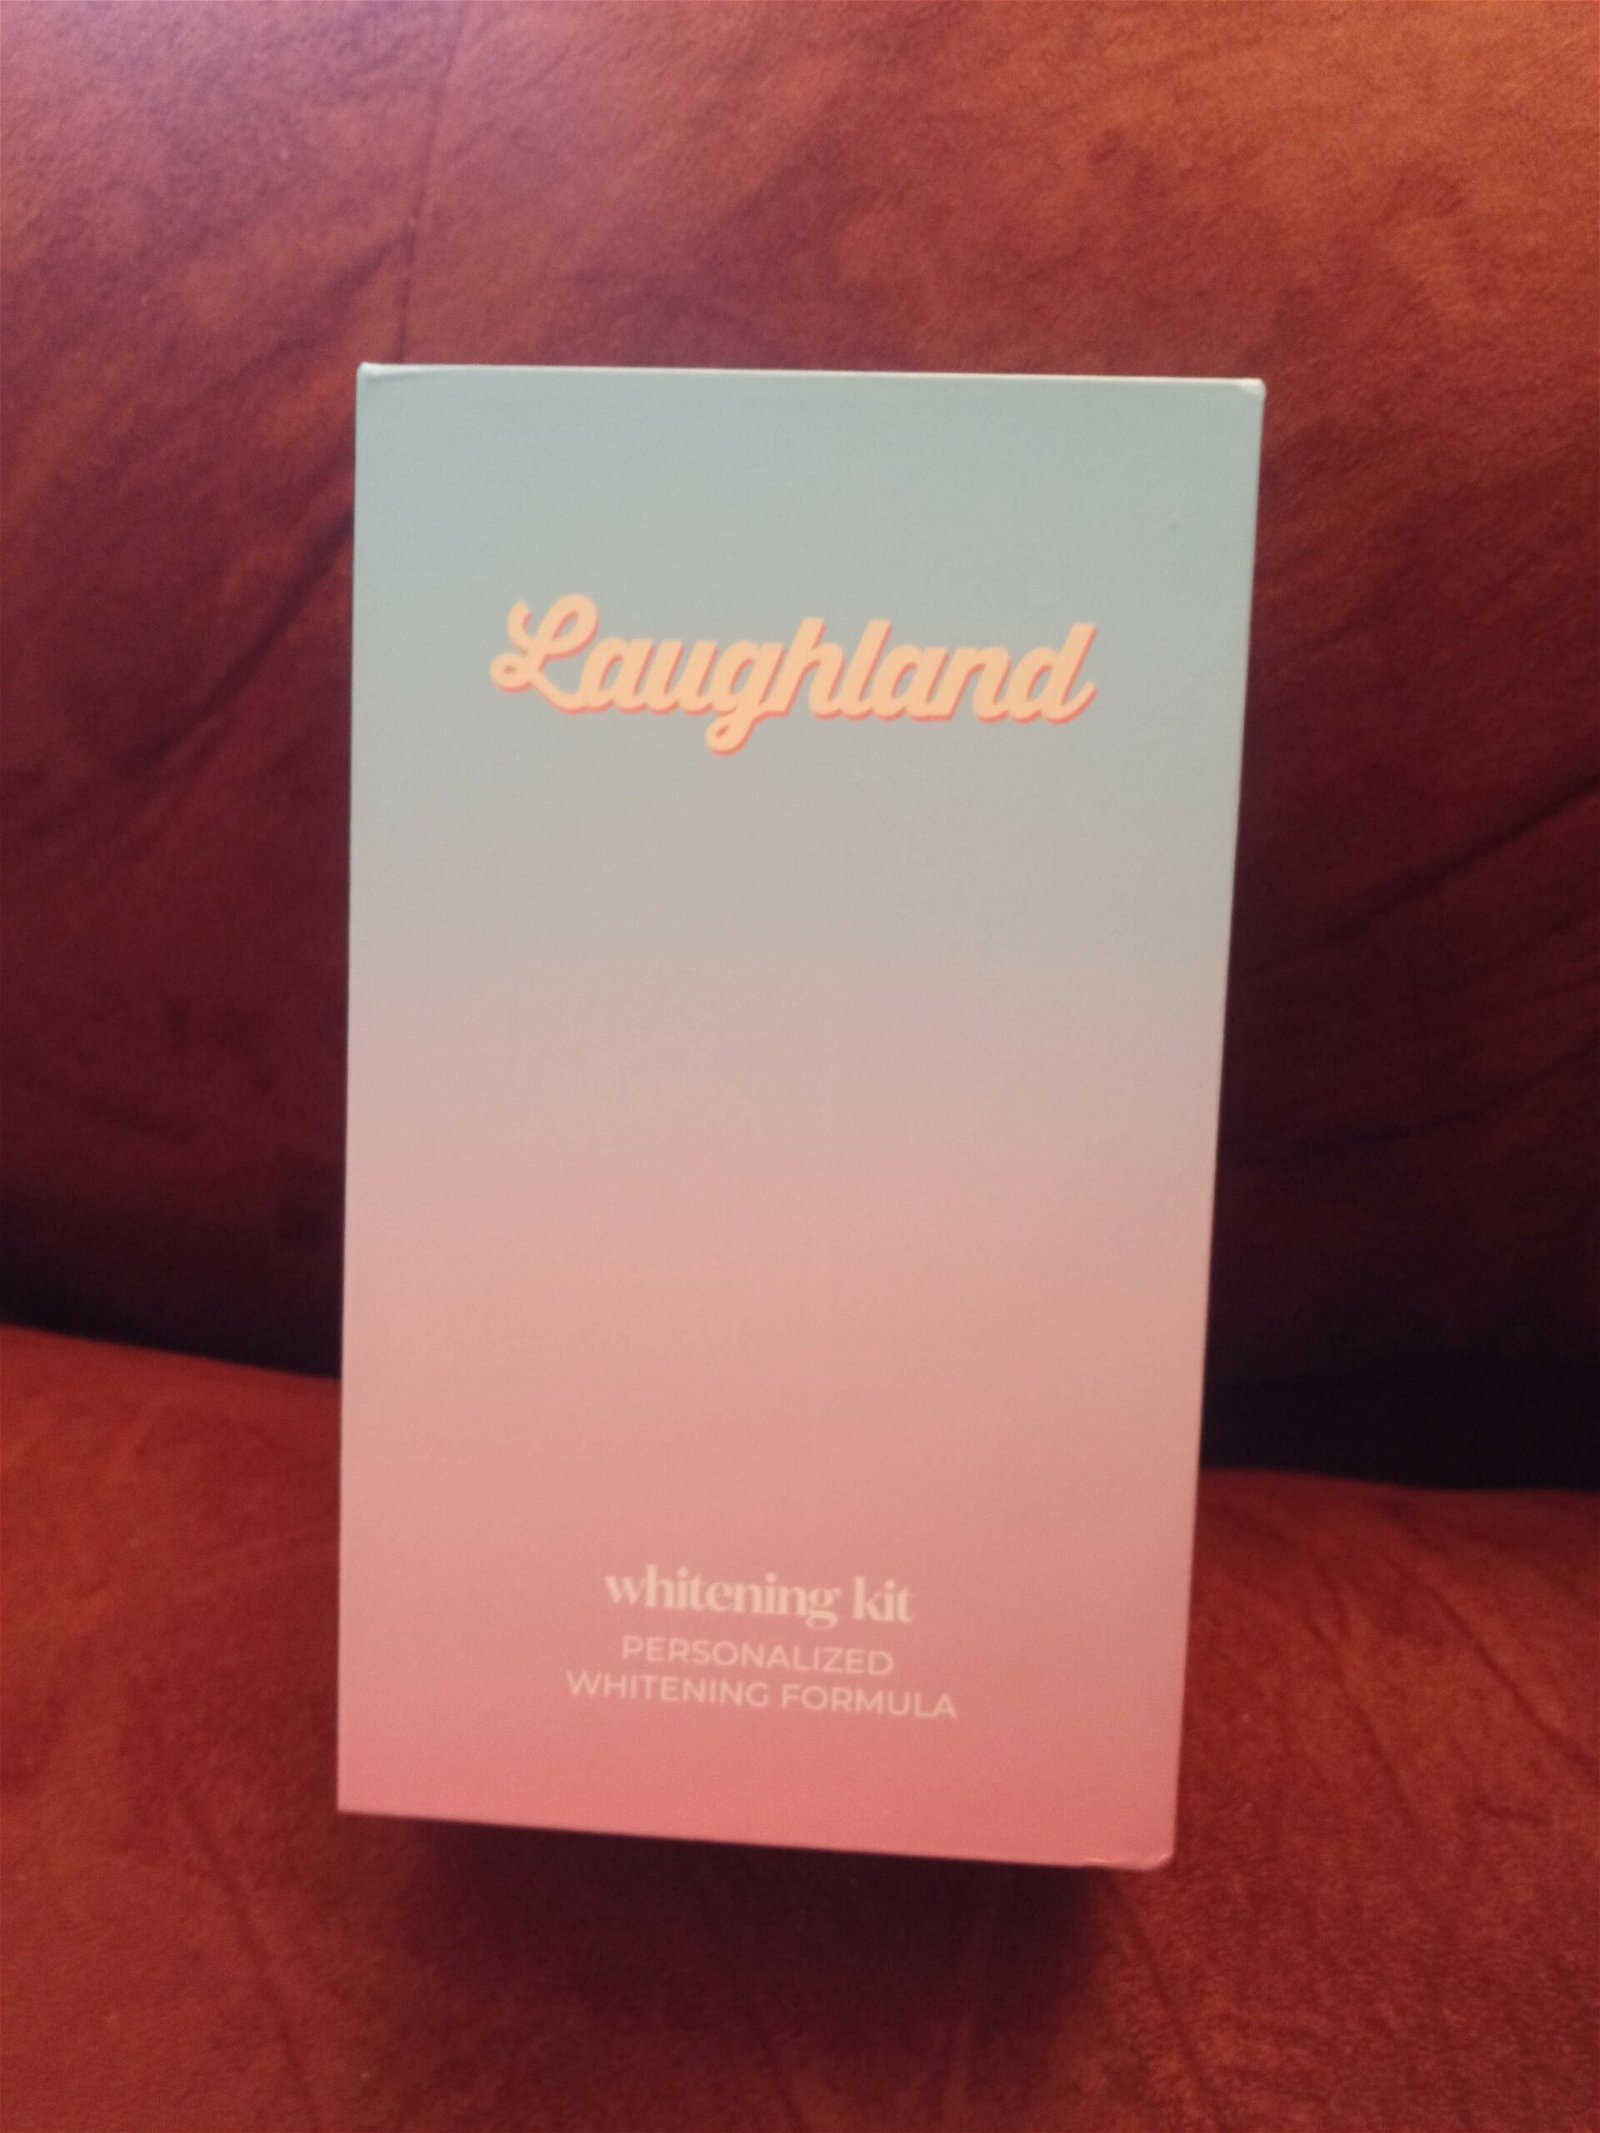 A picture of the Laughland whitening kit's packaging.